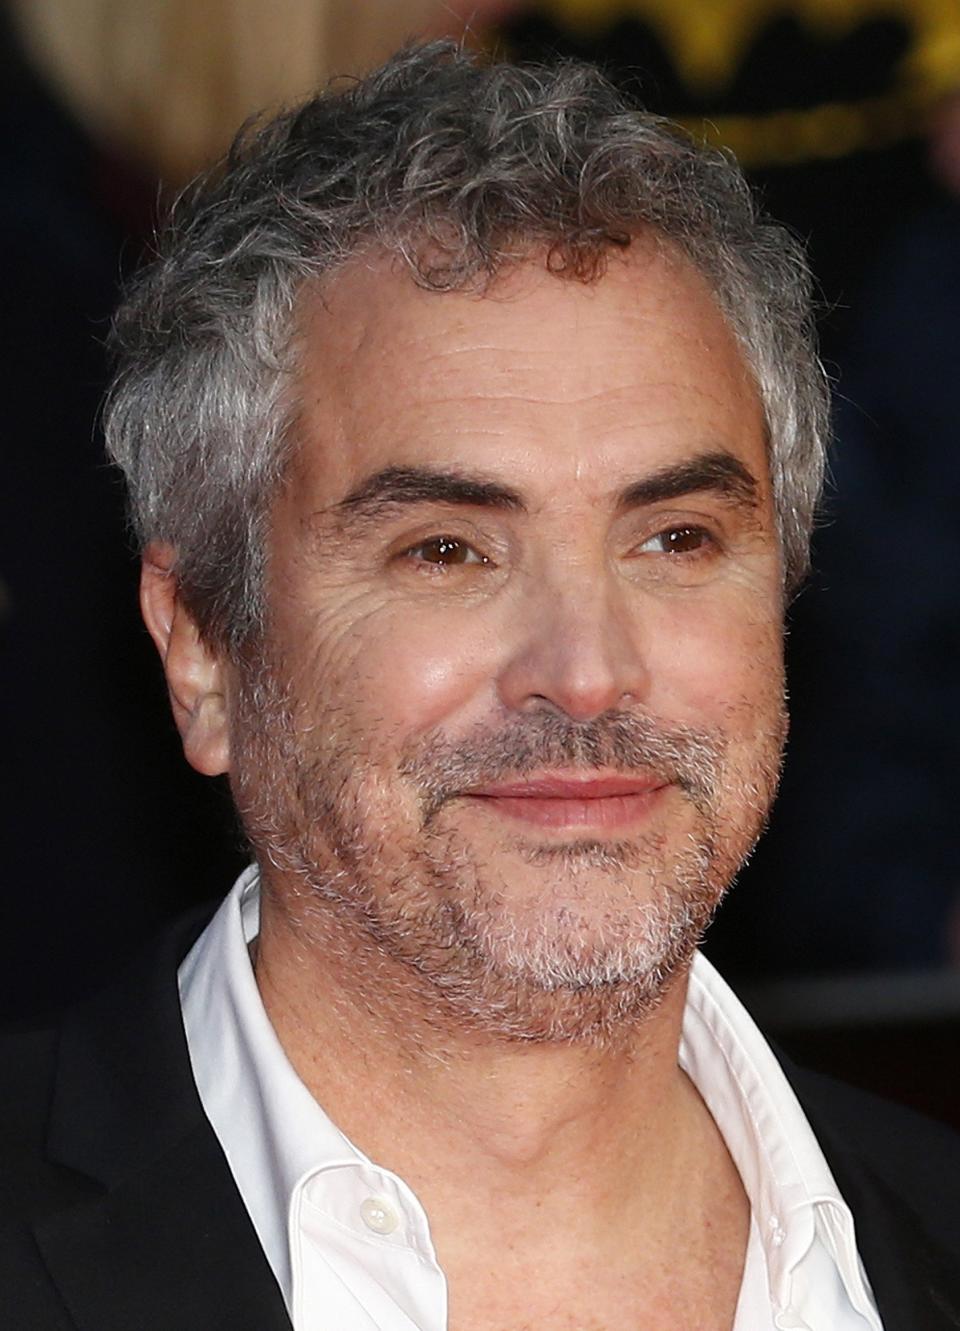 File of director Alfonso Cuaron arriving at a gala screening of his film "Gravity" in central London